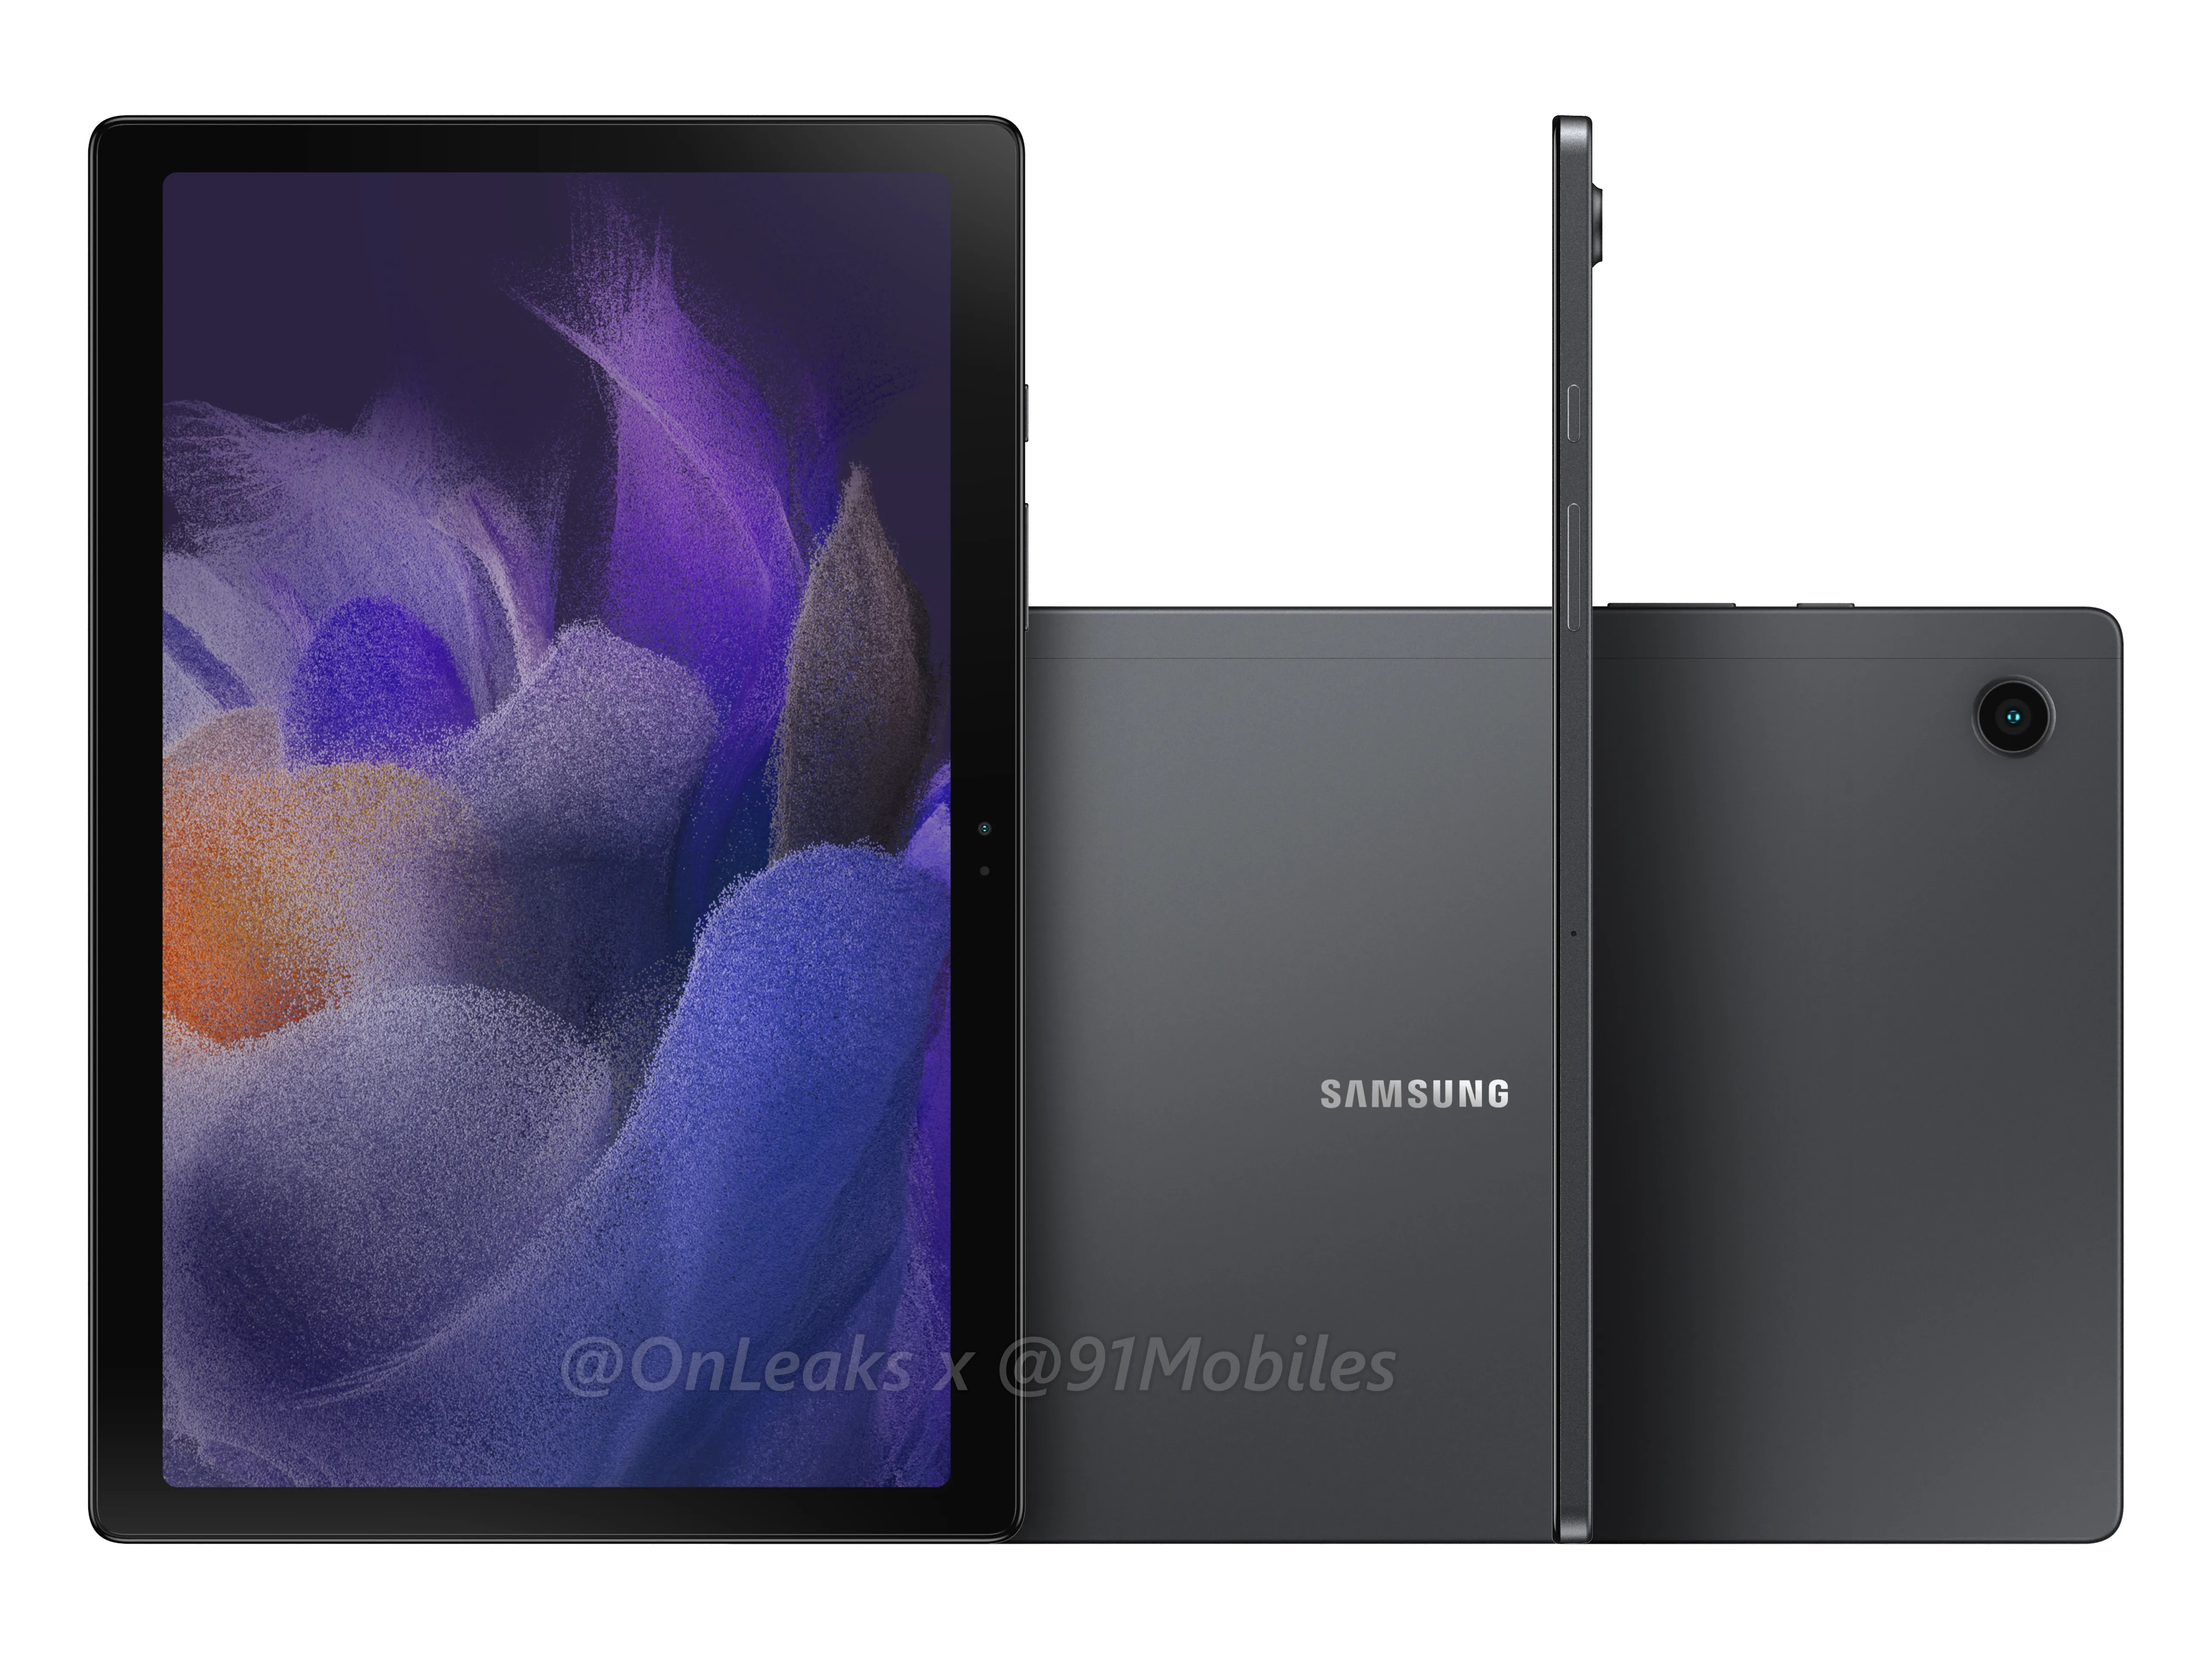 Insider revealed specs and showed renders of the new affordable Samsung Galaxy Tab A8 2021 tablet